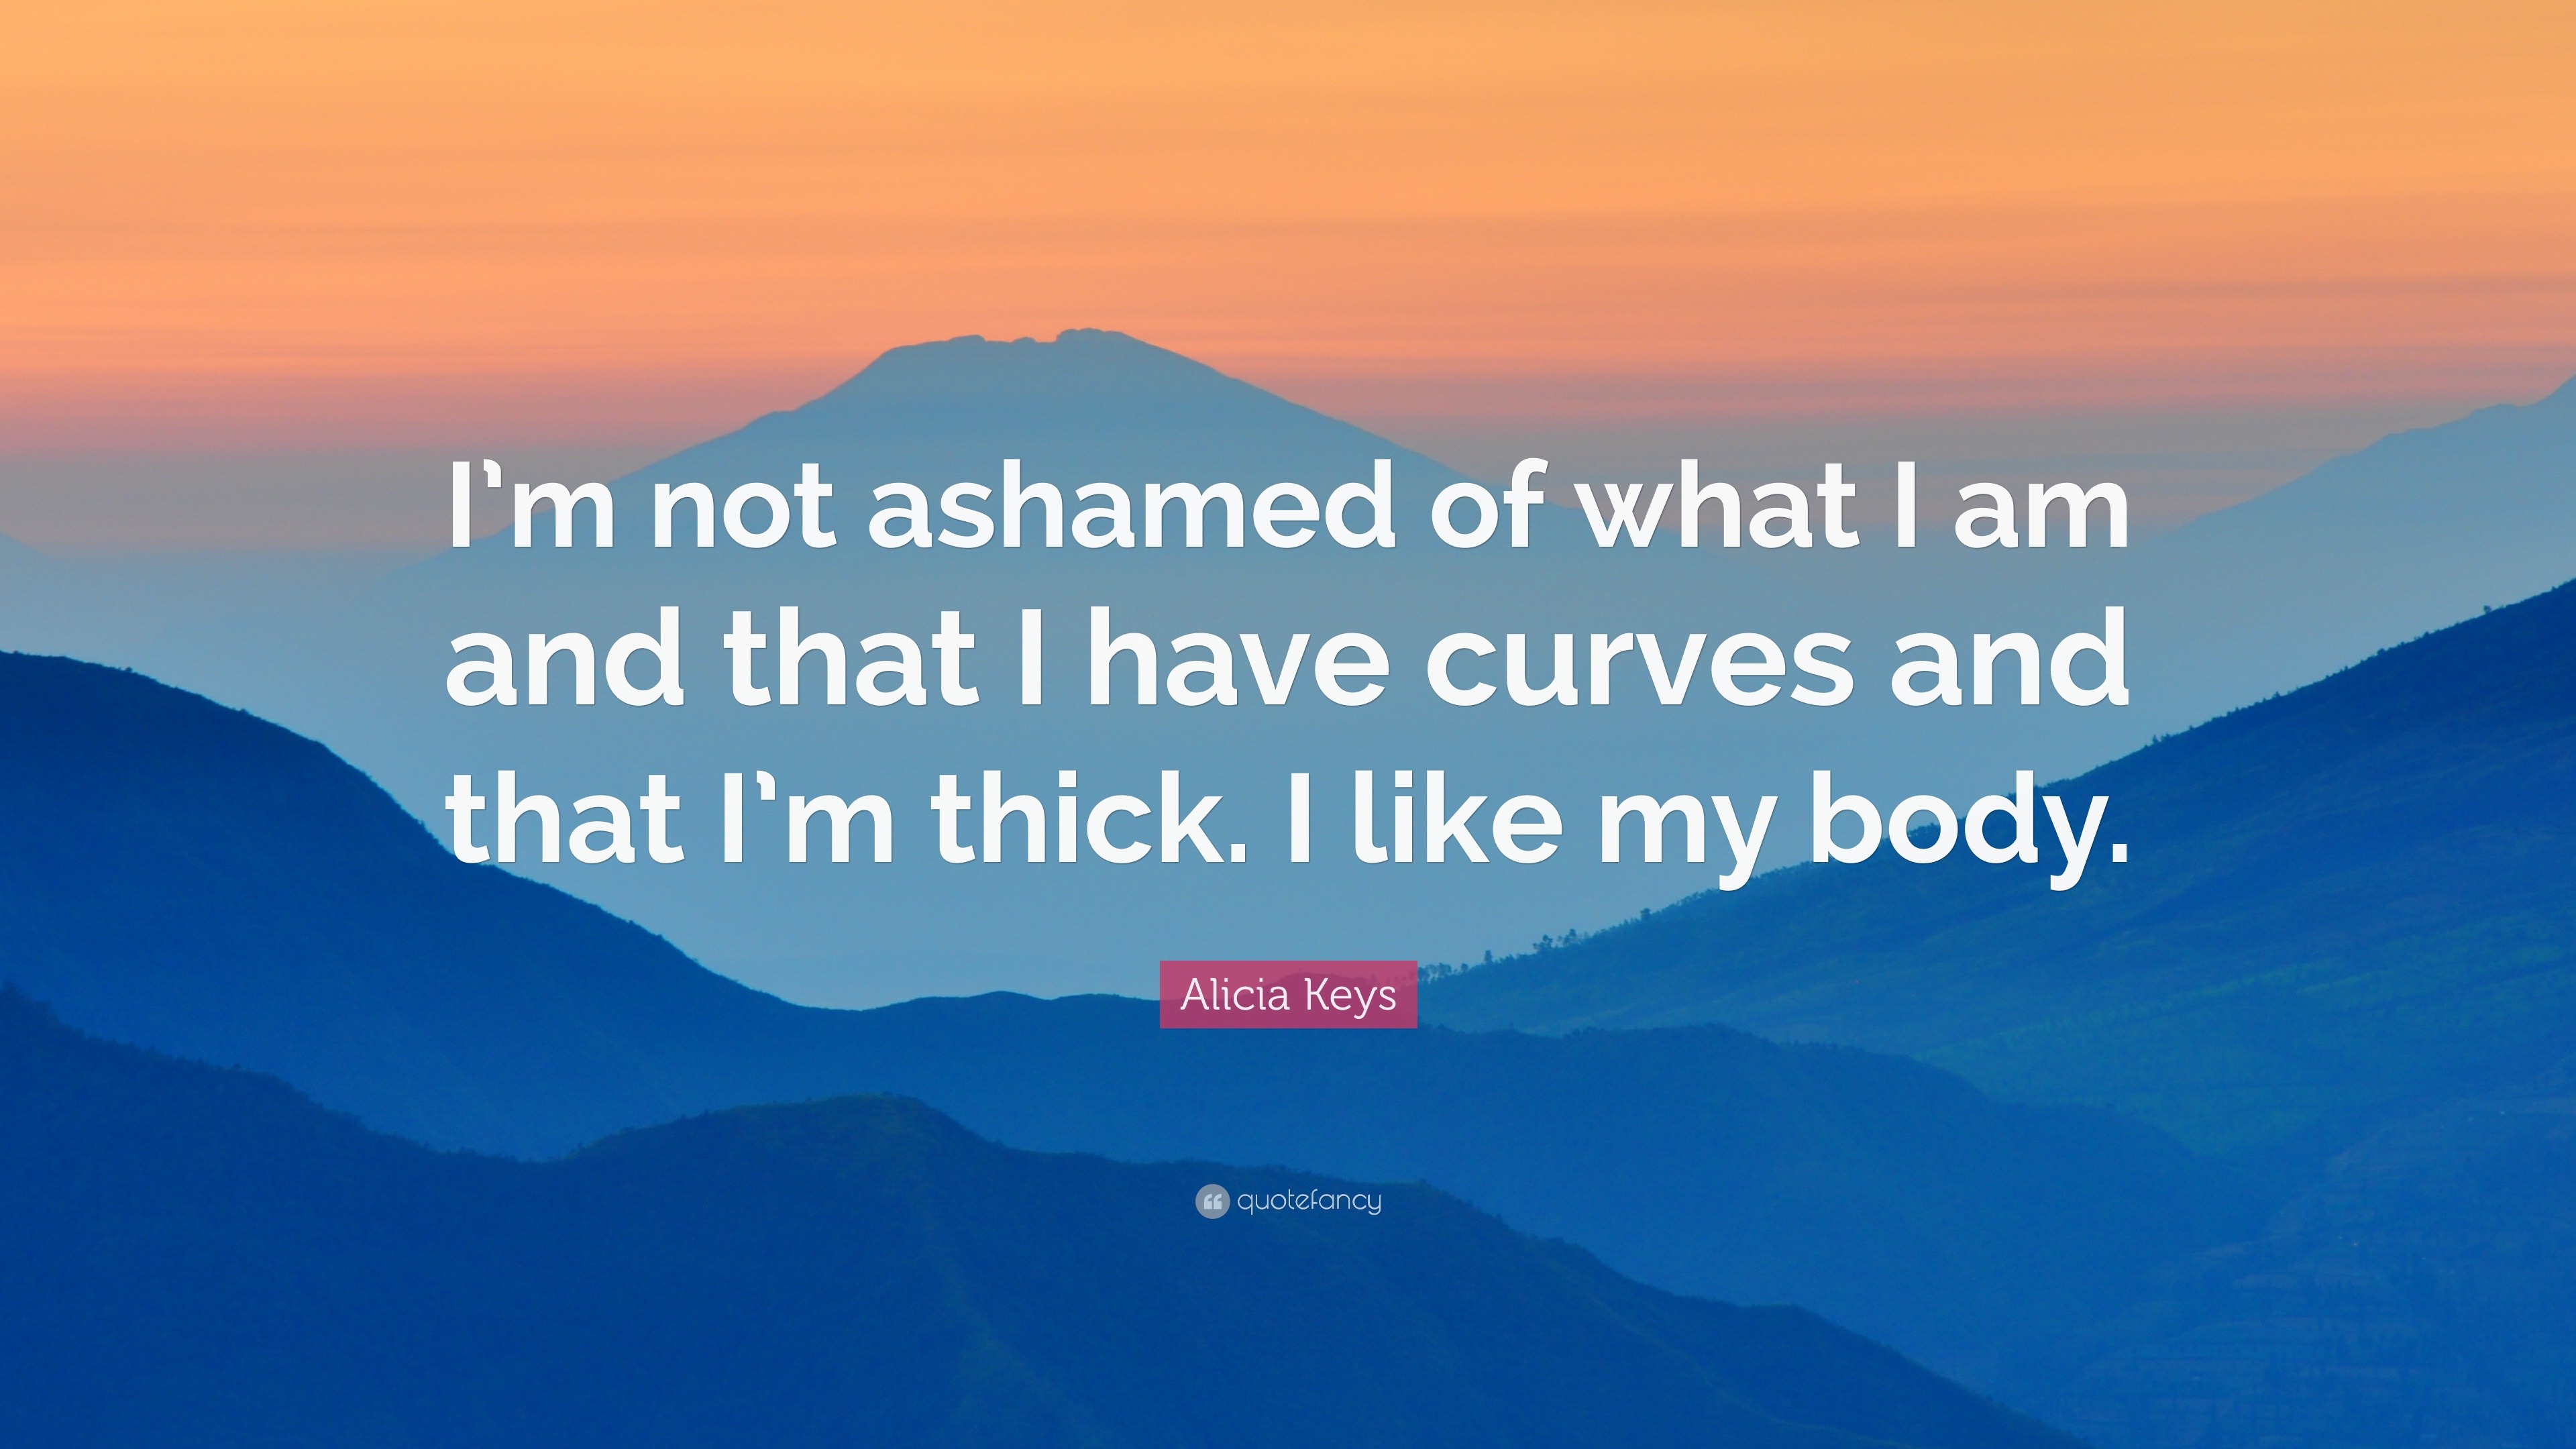 I love my curves, my body and I am not ashamed